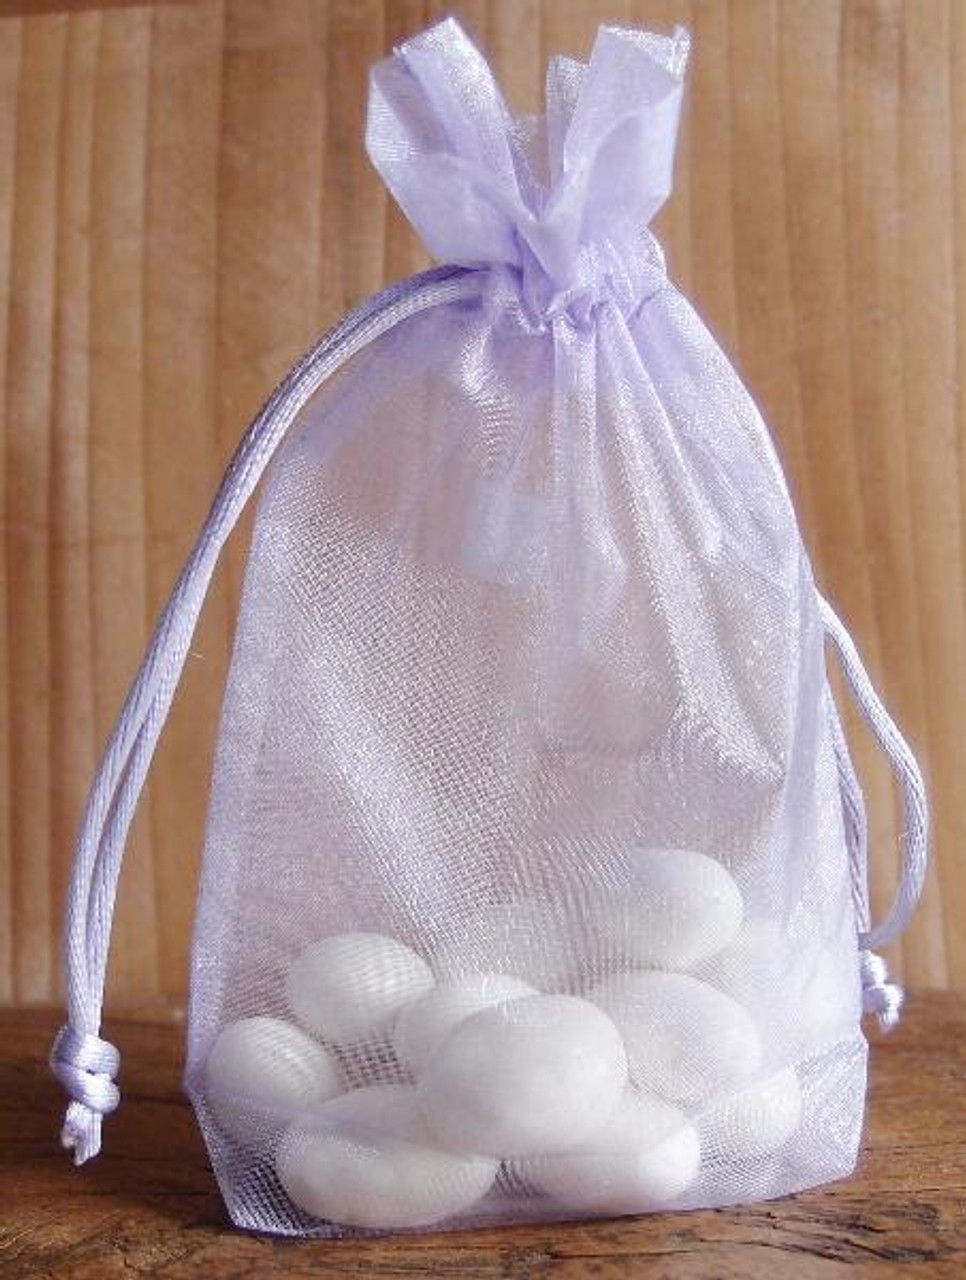 Lavender Gusseted Sheer Bag with Rat-tail Cord (2 sizes)